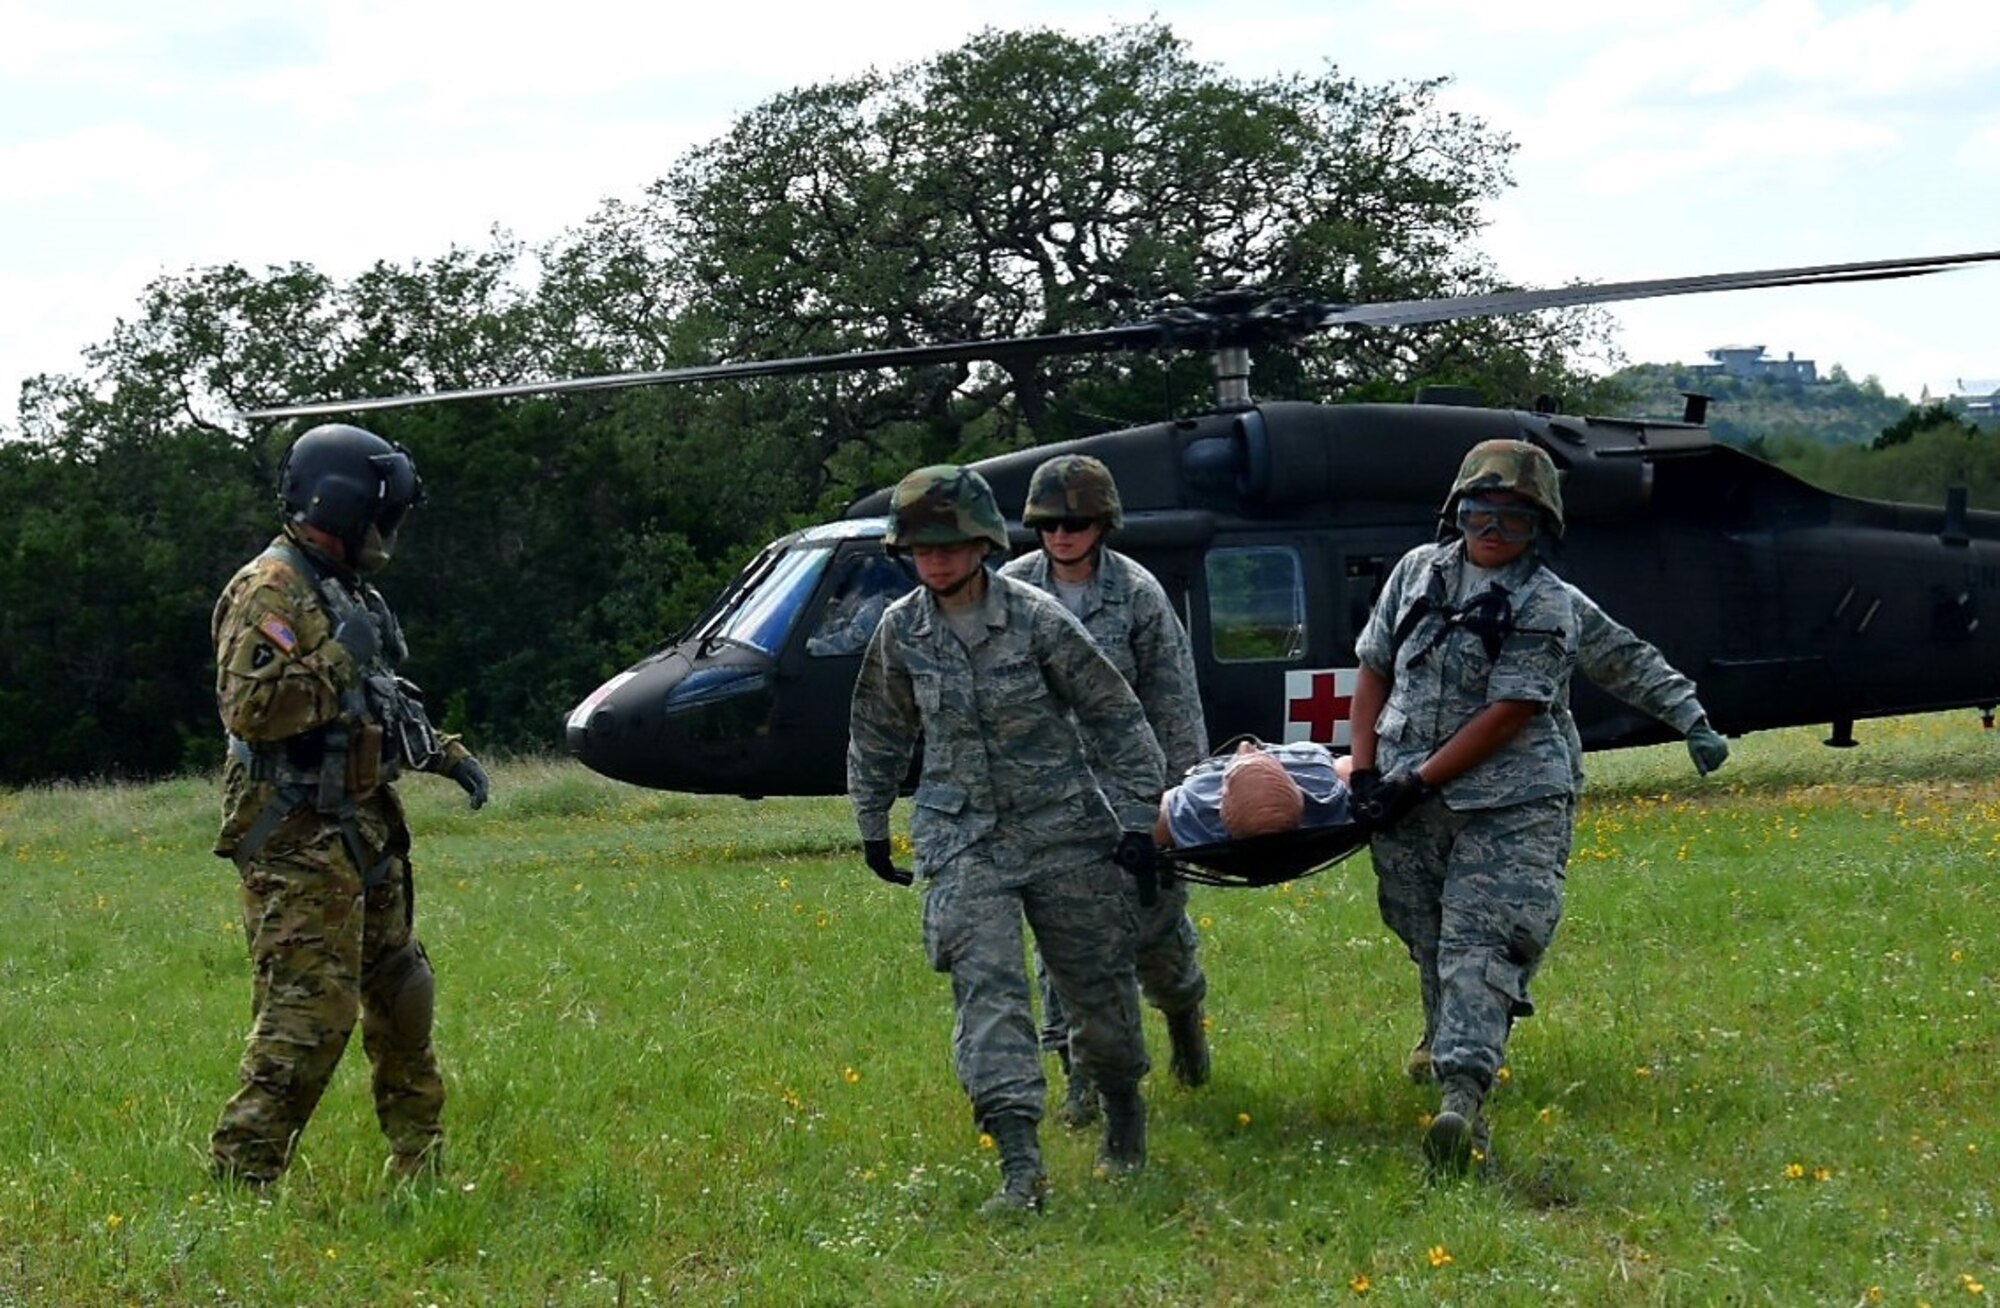 Sgt. 1st Class Dion Cortez, Company C, 2-149 Aviation Texas Army National Guard flight medic, guides medical technicians off-loading a simulated wounded patient by stretcher during Operation Joint Medic at Joint Base San Antonio-Camp Bullis May 5. The simulated wounded patient was loaded onto a Humvee for transportation to an expeditionary medical support facility.